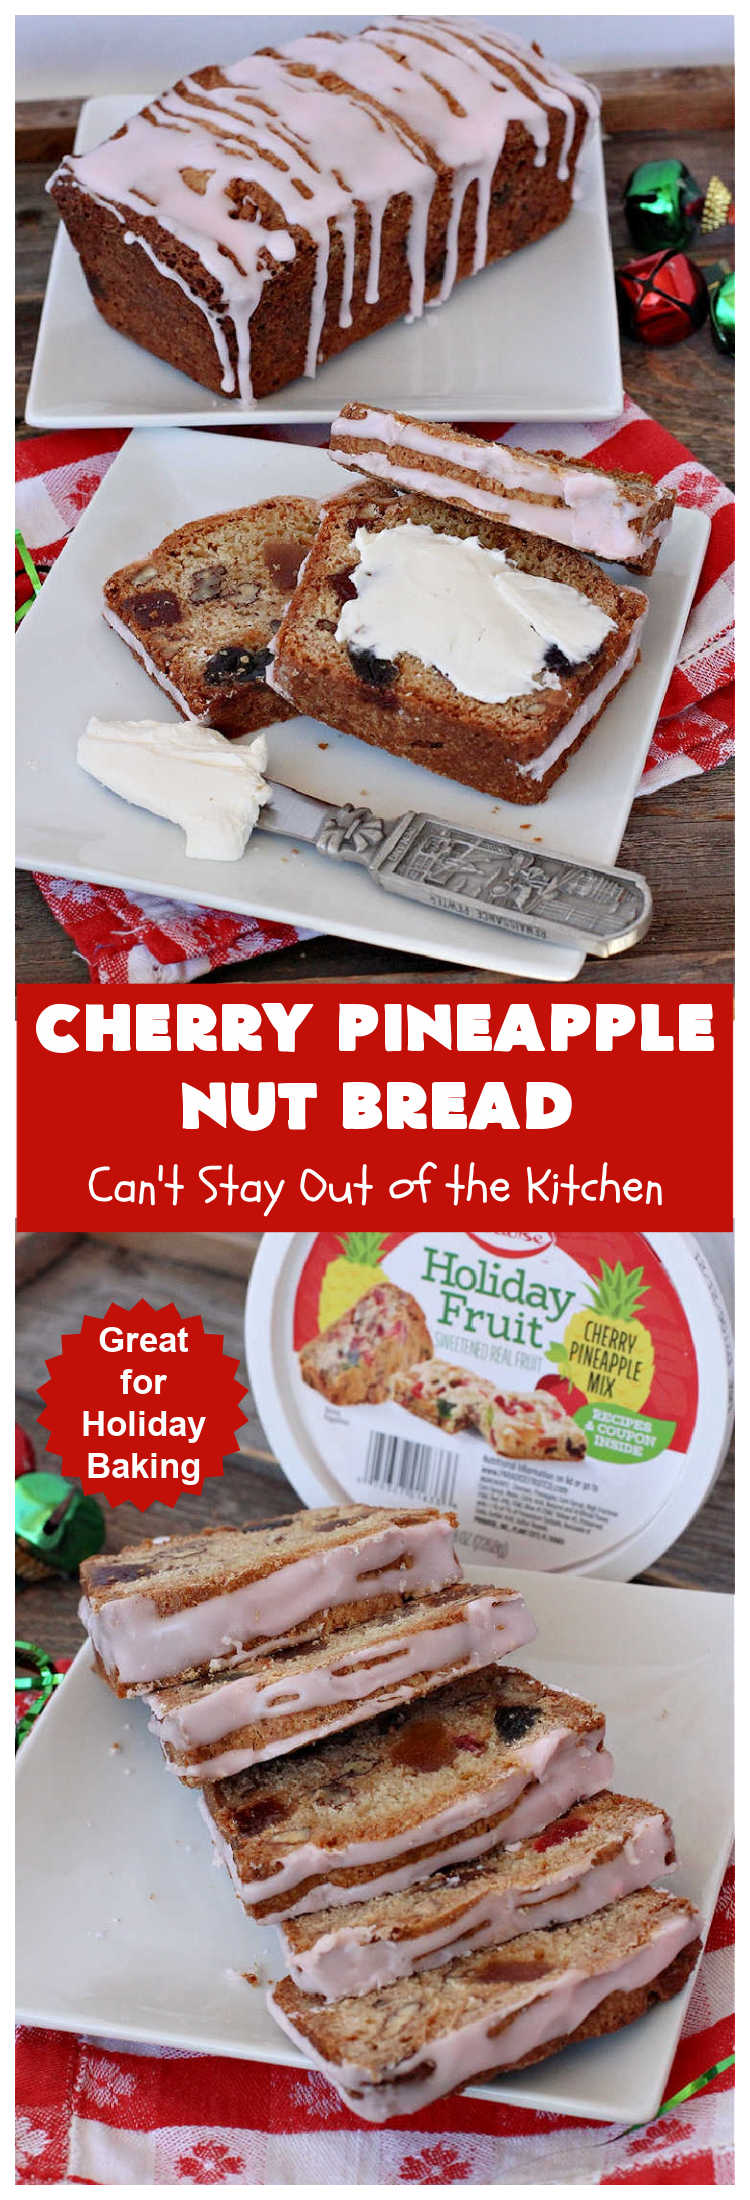 Cherry Pineapple Nut Bread | Can't Stay Out of the Kitchen | this sensational sweet #bread is perfect for the #holidays. It uses #ParadiseFruitCompany's cherry-pineapple mix which includes green & red #cherries & green, red & gold #pineapple. The flavors of this bread are so mouthwatering it's perfect for a #Thanksgiving, #Christmas or #NewYearsDay #breakfast. #pecans #HolidayBread #CherryPineappleNutBread